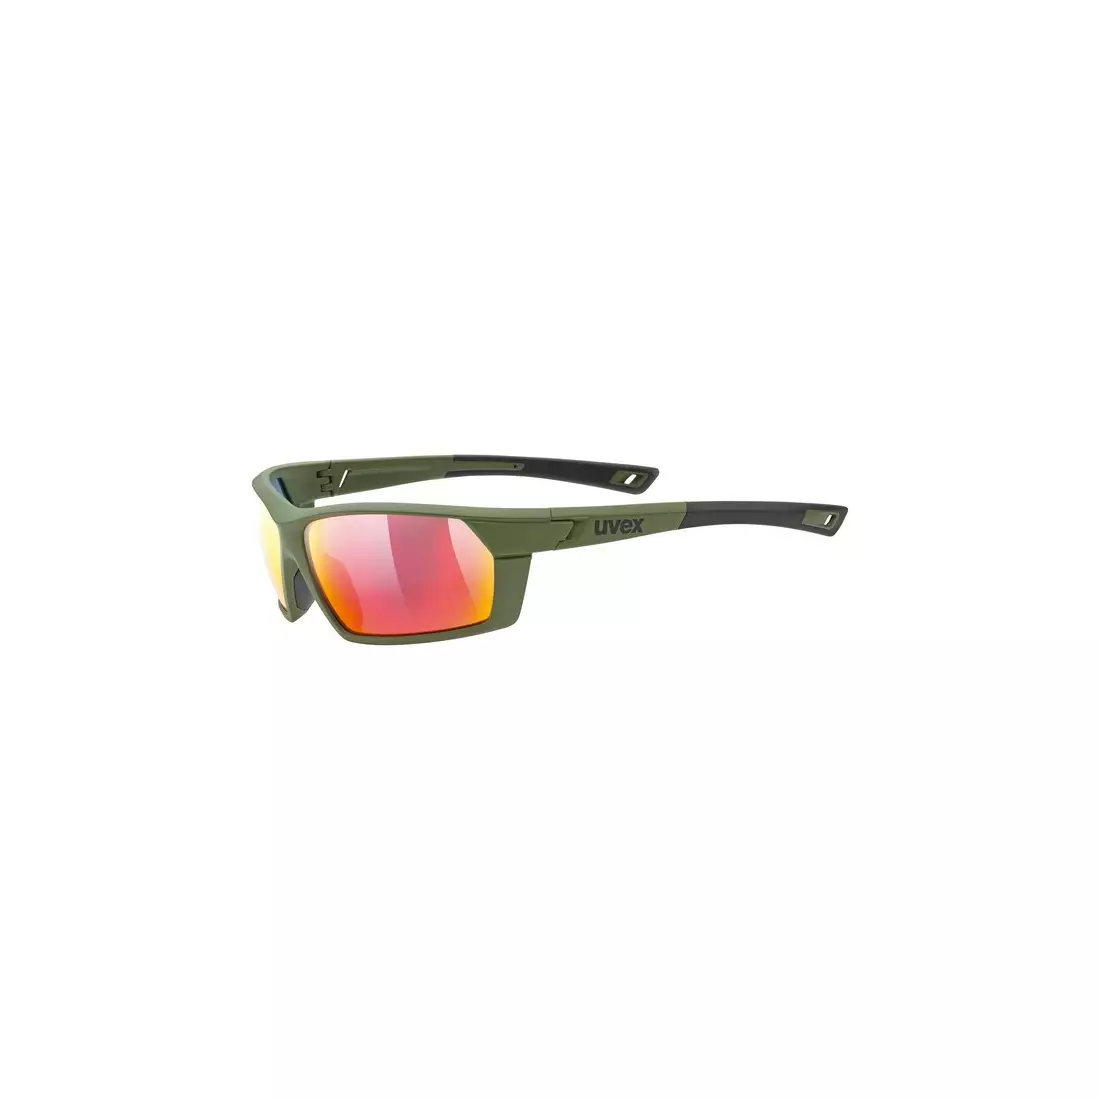 Cycling / sports glasses Uvex sportstyle 225 53/2/025/7716/UNI SS19